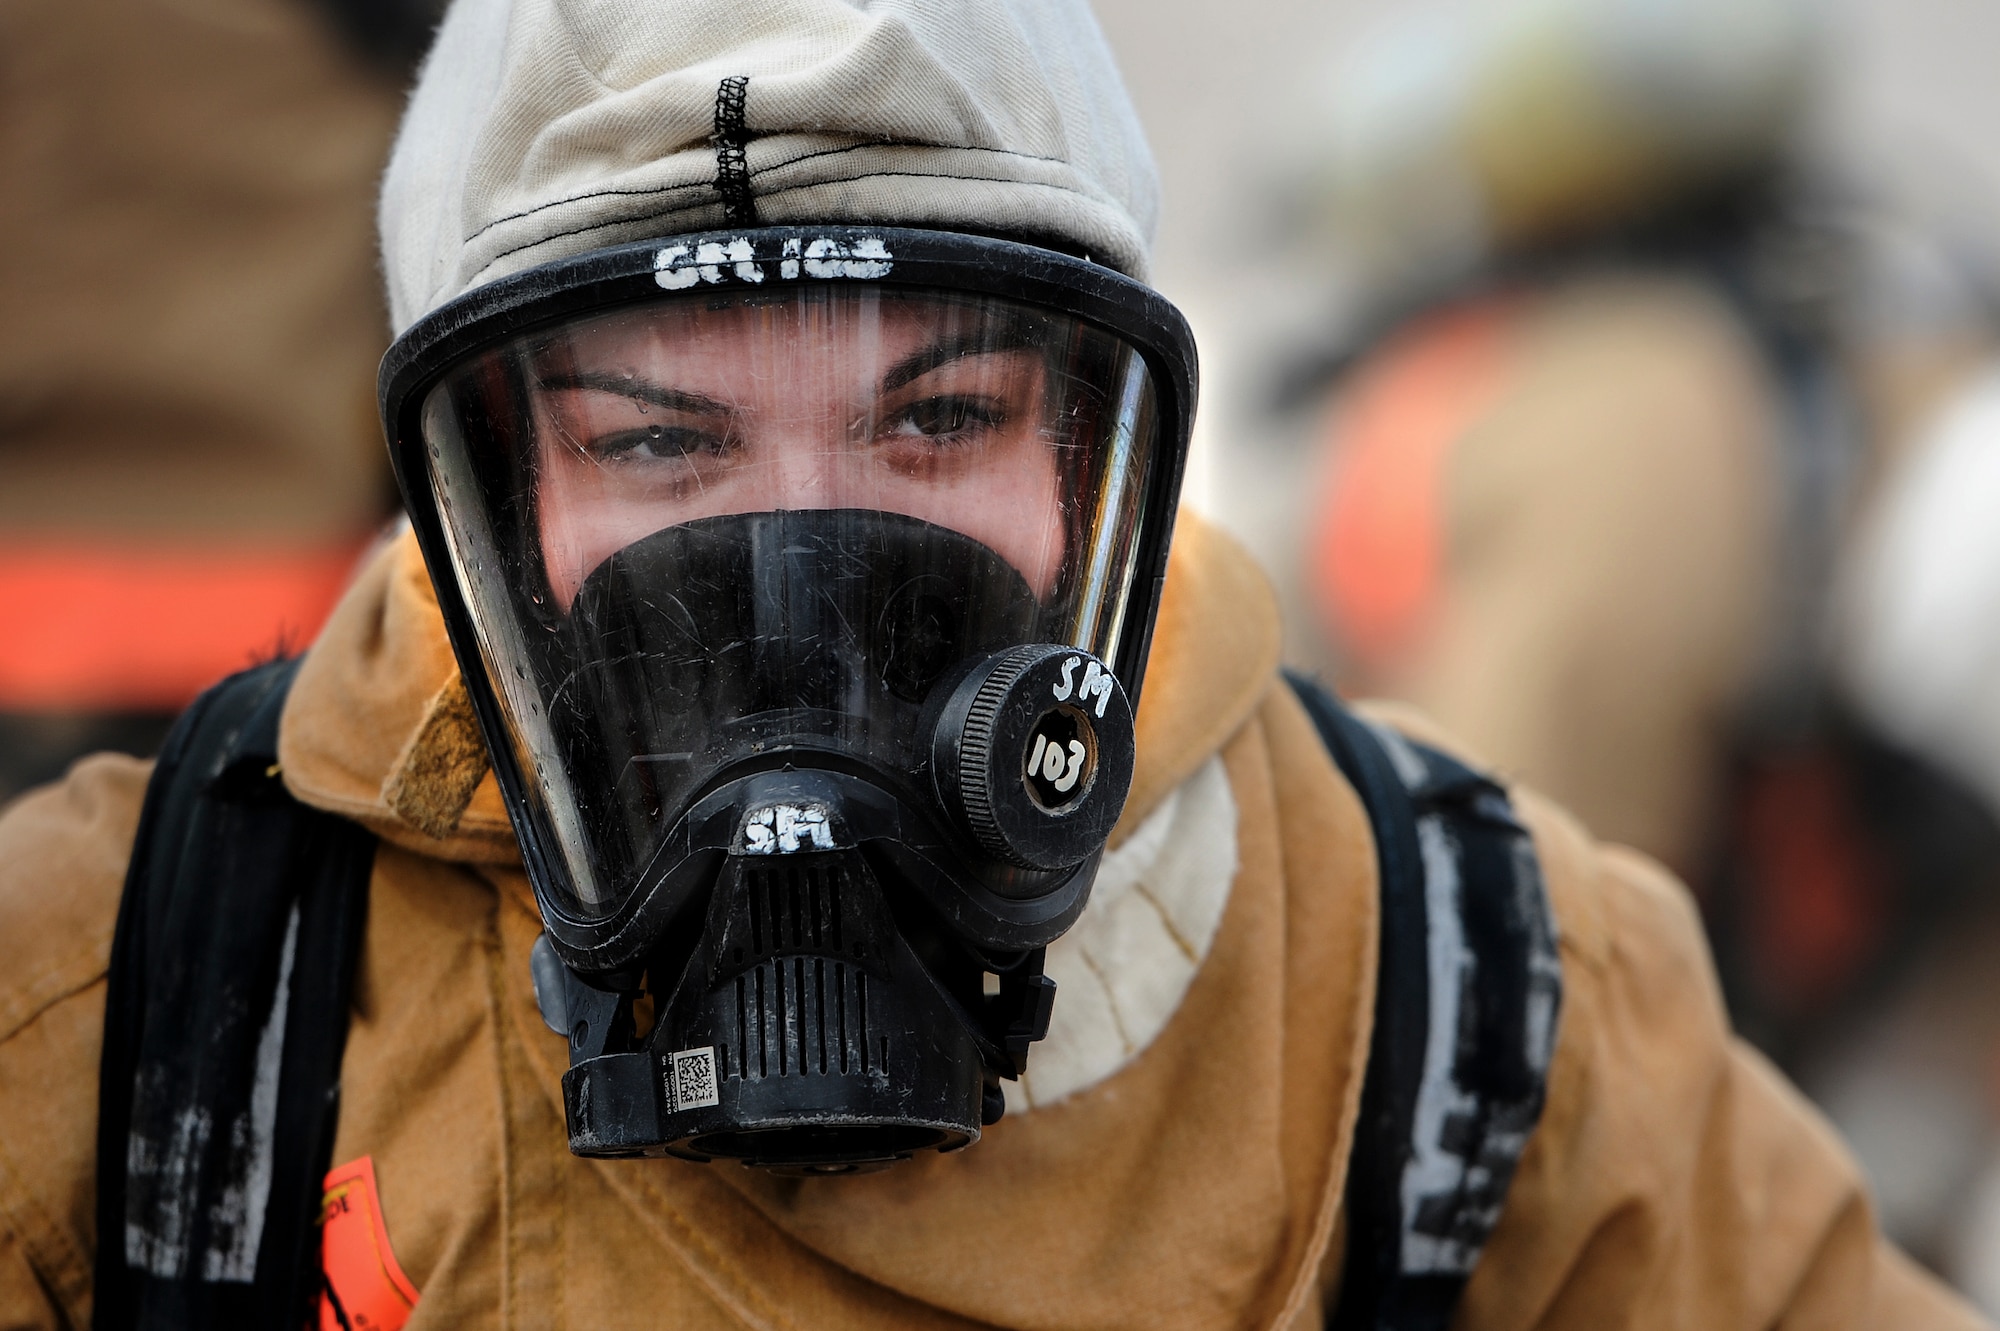 GOODFELLOW AIR FORCE BASE, Texas – Airman 1st Class Brooke D. Hunt, 177th Fighter Wing New Jersey Air National Guard firefighter apprentice, wears fire protection gear at the Louis F. Garland Department of Defense Fire Academy Feb. 3. Hunt is a student of the Fire Protection Apprentice Course at the fire academy. (U.S. Air Force photo/ Airman 1st Class Devin Boyer)